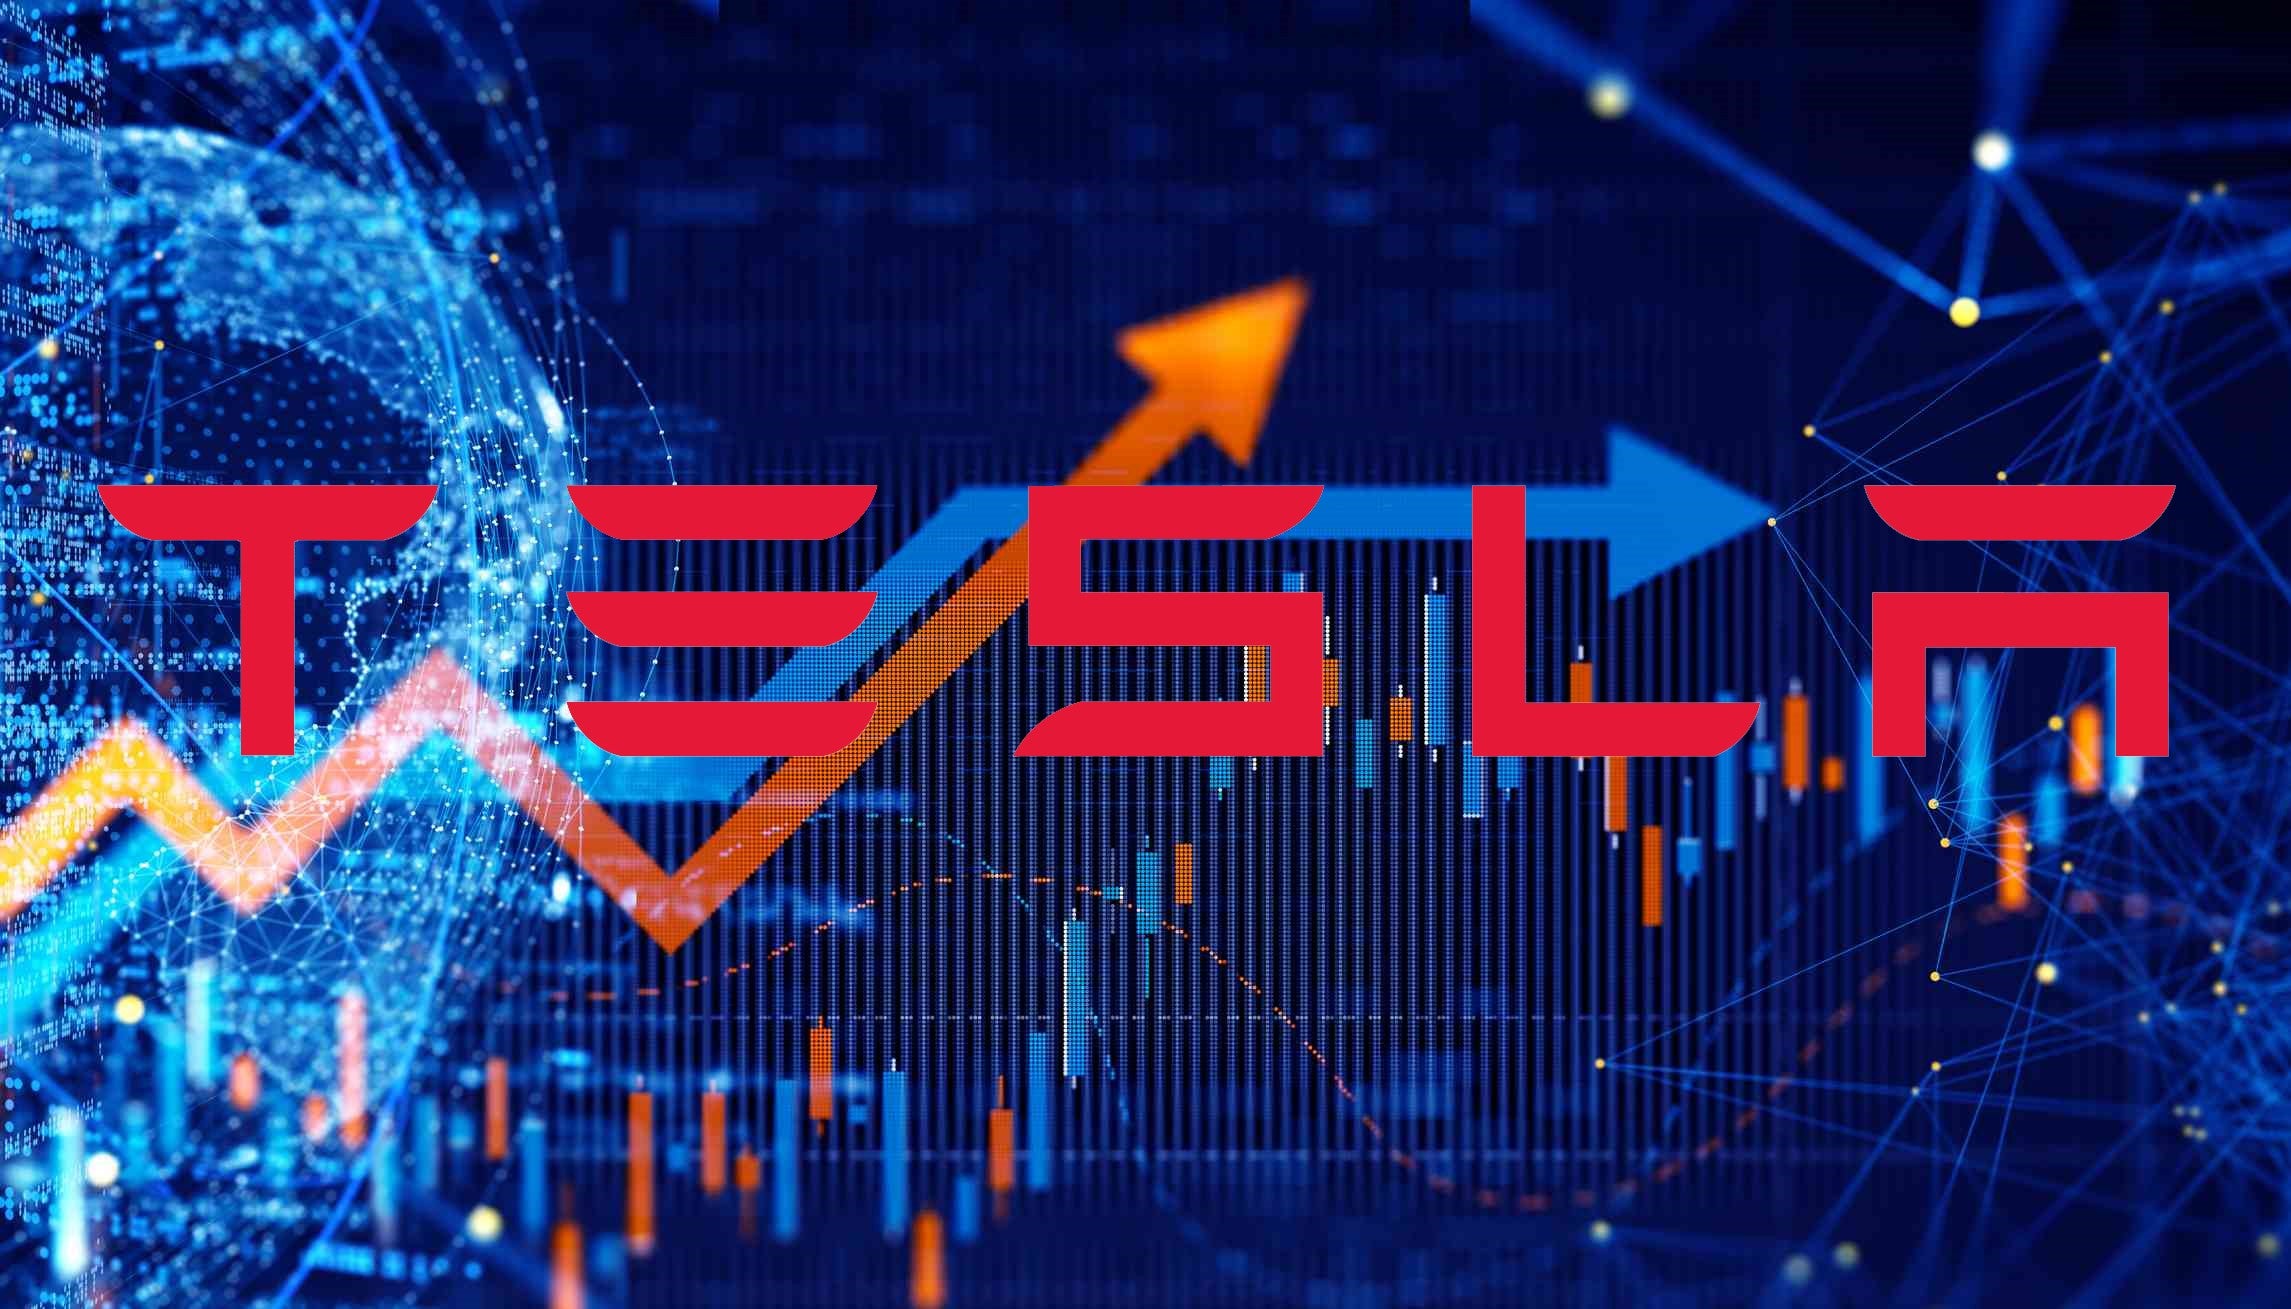 Tesla TSLA Tokenized Shares Can Now Be Purchased on Crypto Exchanges with Bitcoin BTC, Etc